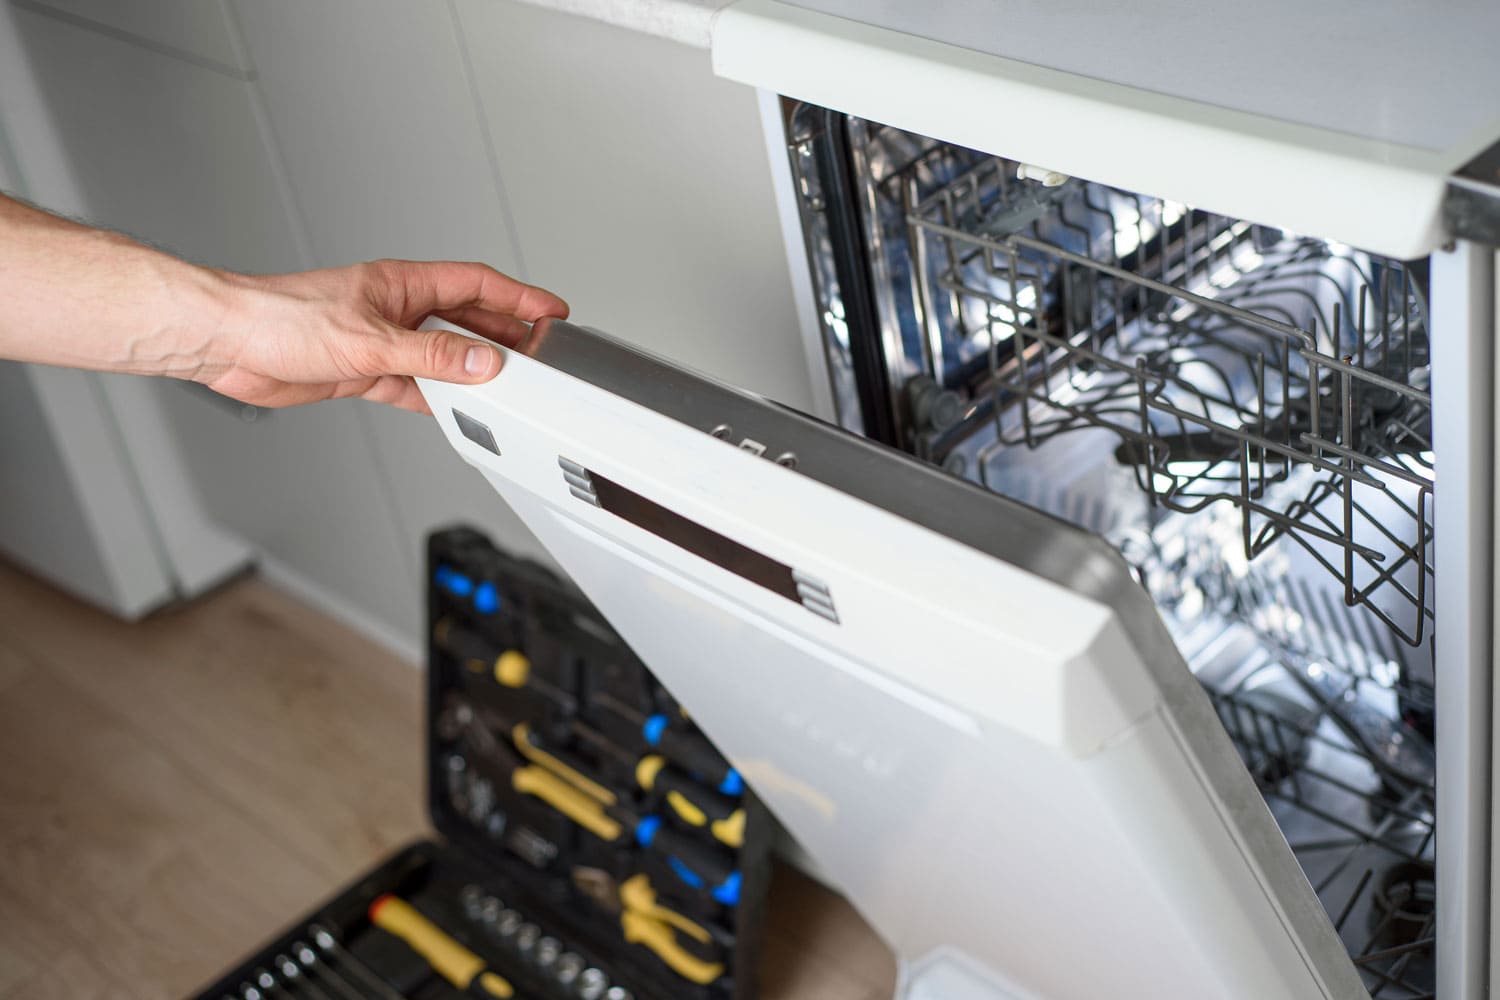 Have a repairman for running diagnostics on your dishwasher than doing it on your own unless your expert